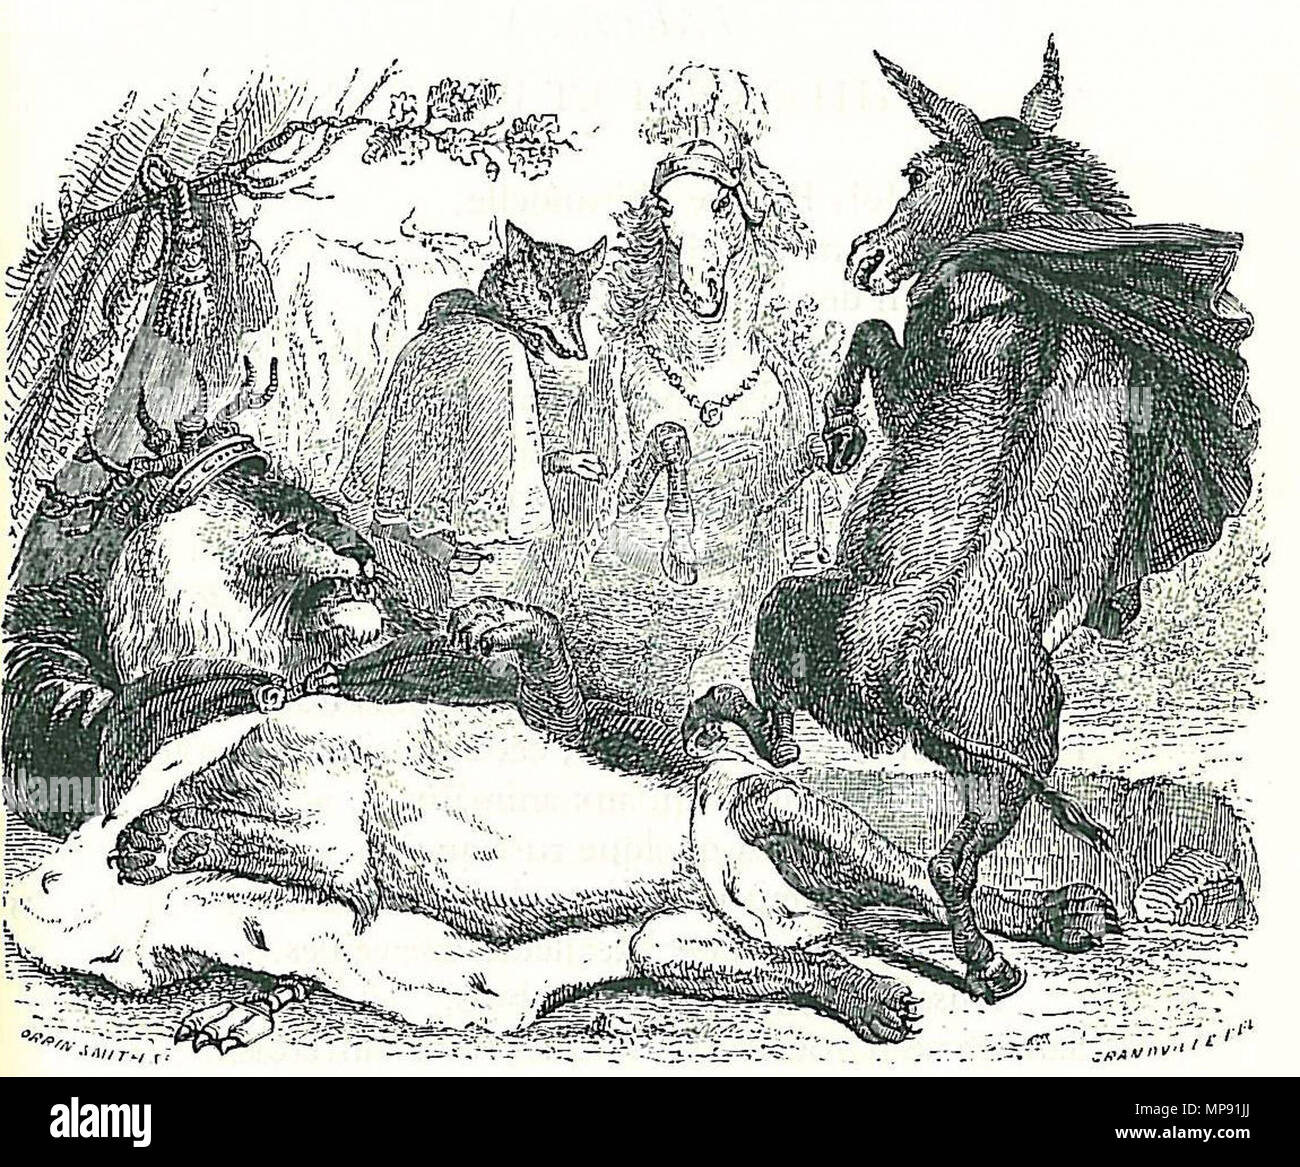 . English: illustration of Jean de La Fontaine's fables by Grandville . before 19th century.   Jean Ignace Isidore Gérard Grandville         Alternative names Jean-Jacques Grandville, Jean Ignace Isidore Gérard, J.J. Grandville, Grandville  Description French caricaturist, illustrator and painter  Date of birth/death 13 September 1803 / 1803 17 March 1847 / 1847  Location of birth/death Nancy Vanves  Work location Paris (1823 - 1847)  Authority control  : Q744442 VIAF: 9846982 ISNI: 0000 0001 2120 0923 ULAN: 500029535 LCCN: n50037075 NLA: 36571455 WorldCat 797 Le lion devenu vieux Stock Photo